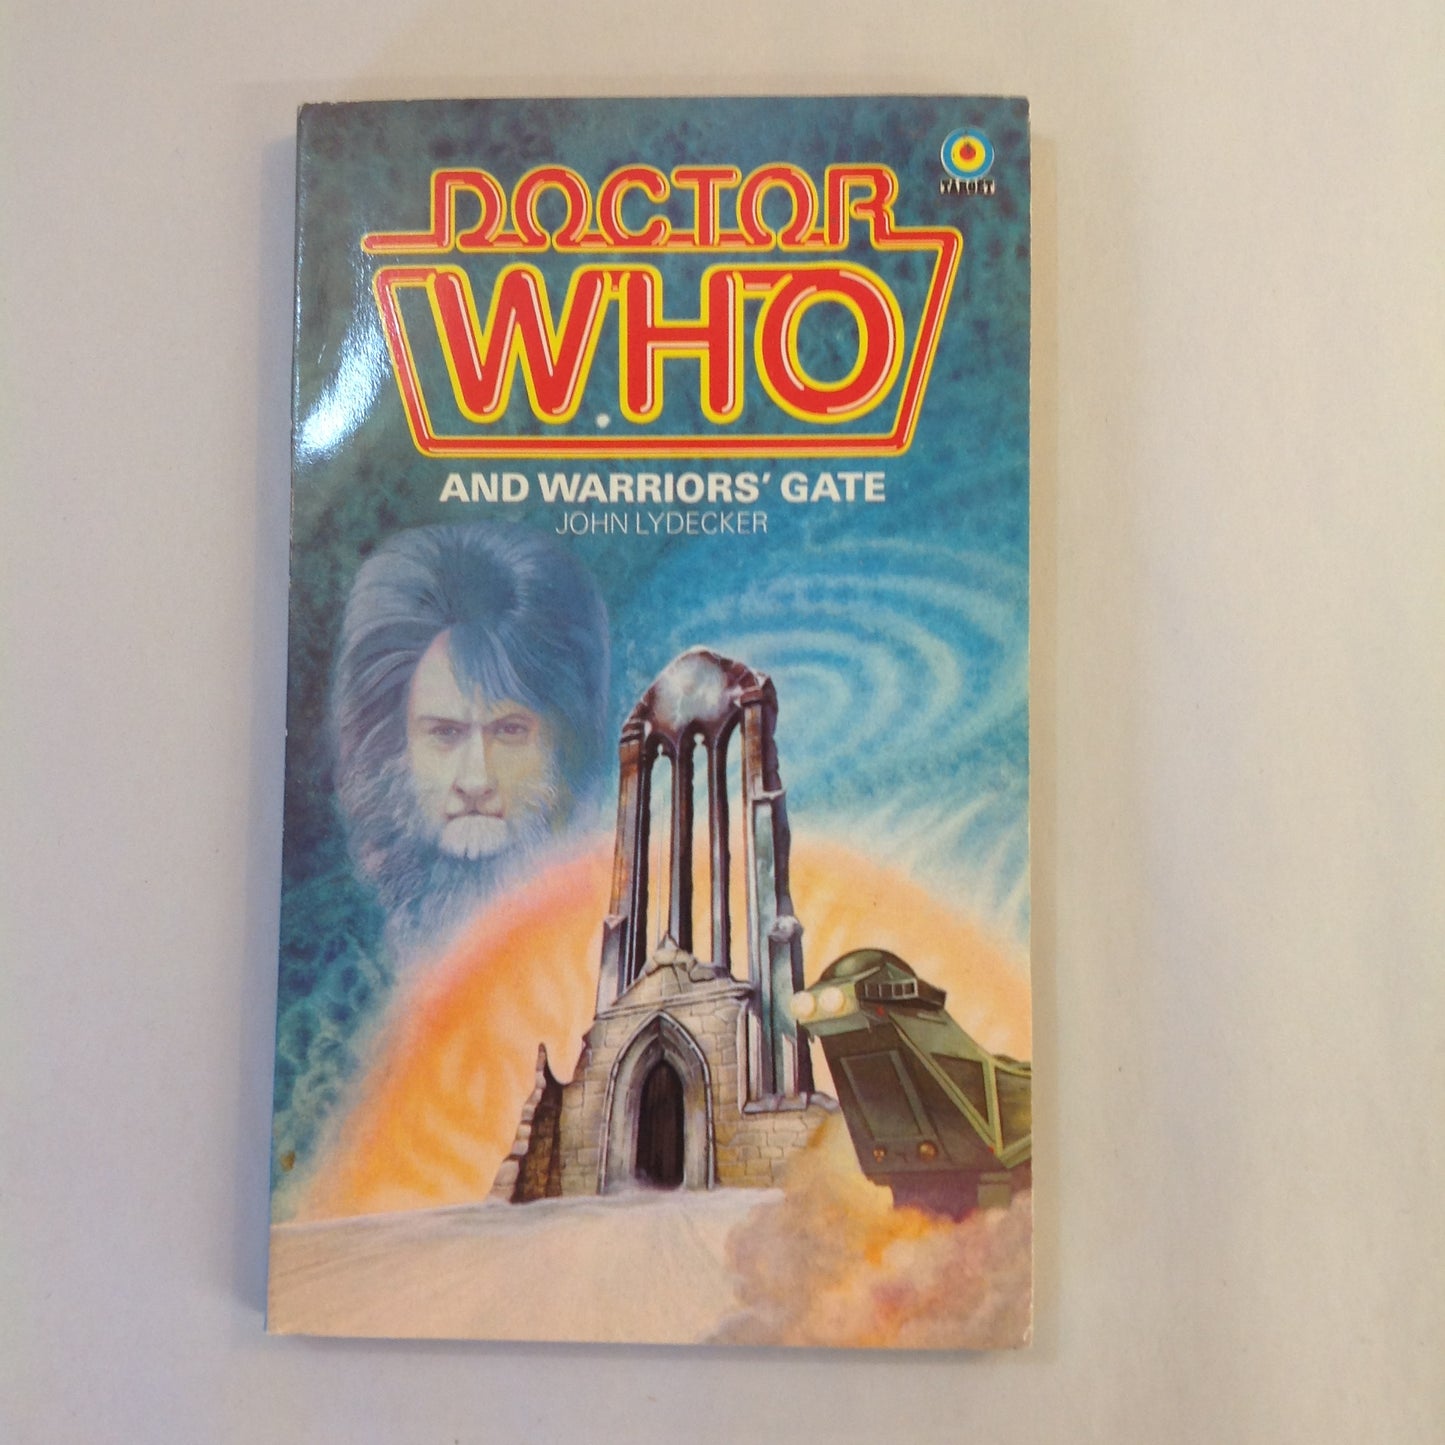 Vintage 1982 Mass Market Paperback Doctor Who and Warriors' Gate John Lydecker First Edition